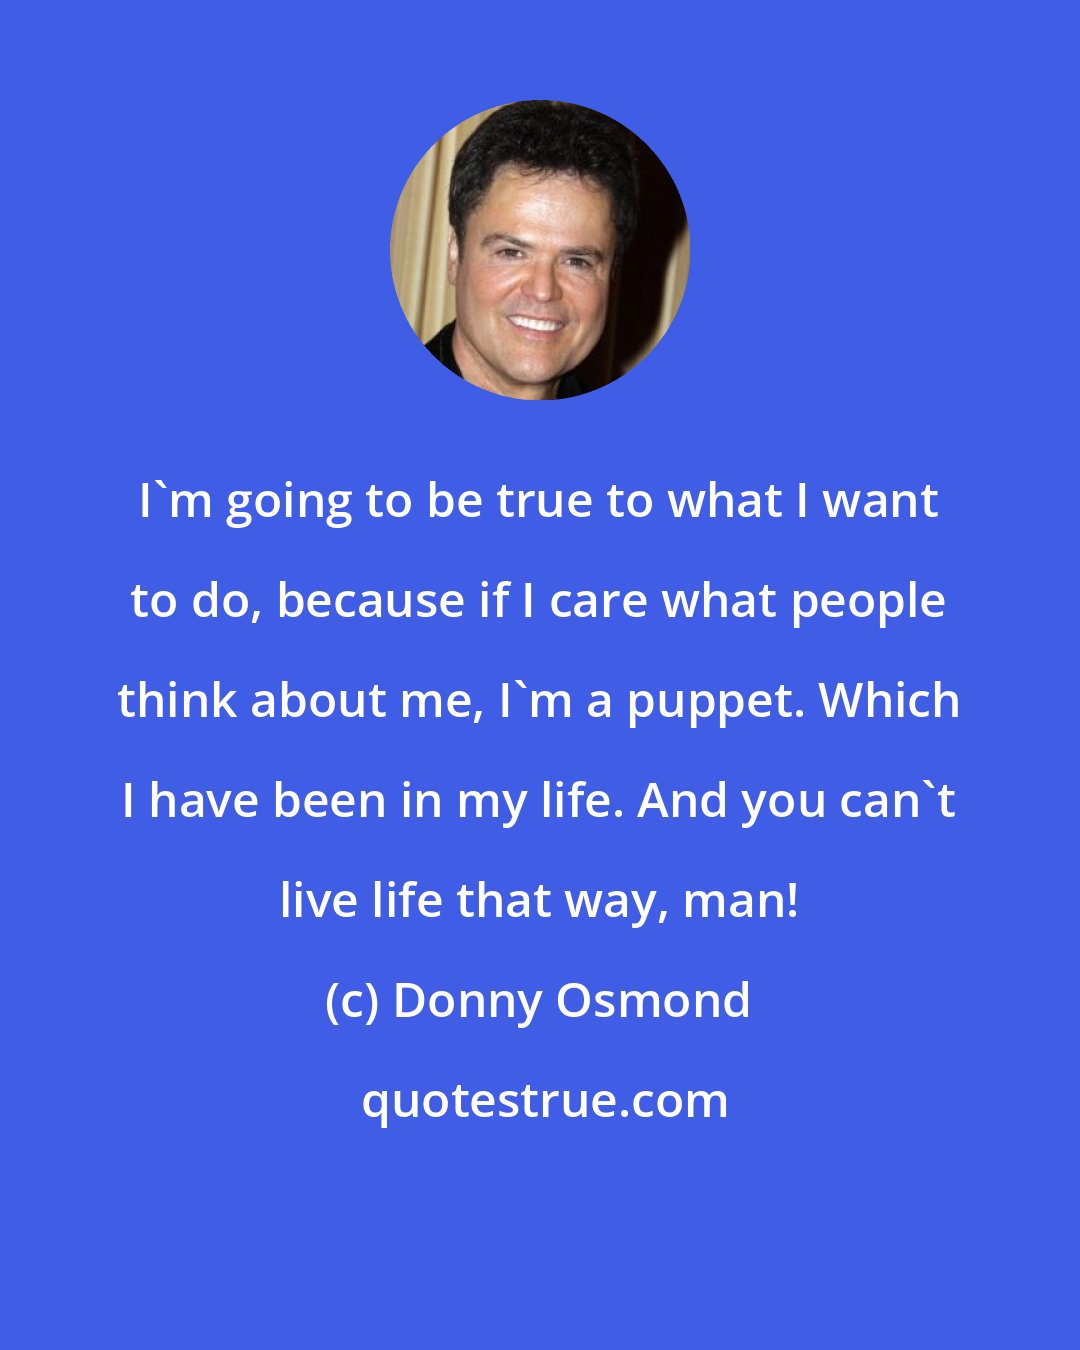 Donny Osmond: I'm going to be true to what I want to do, because if I care what people think about me, I'm a puppet. Which I have been in my life. And you can't live life that way, man!